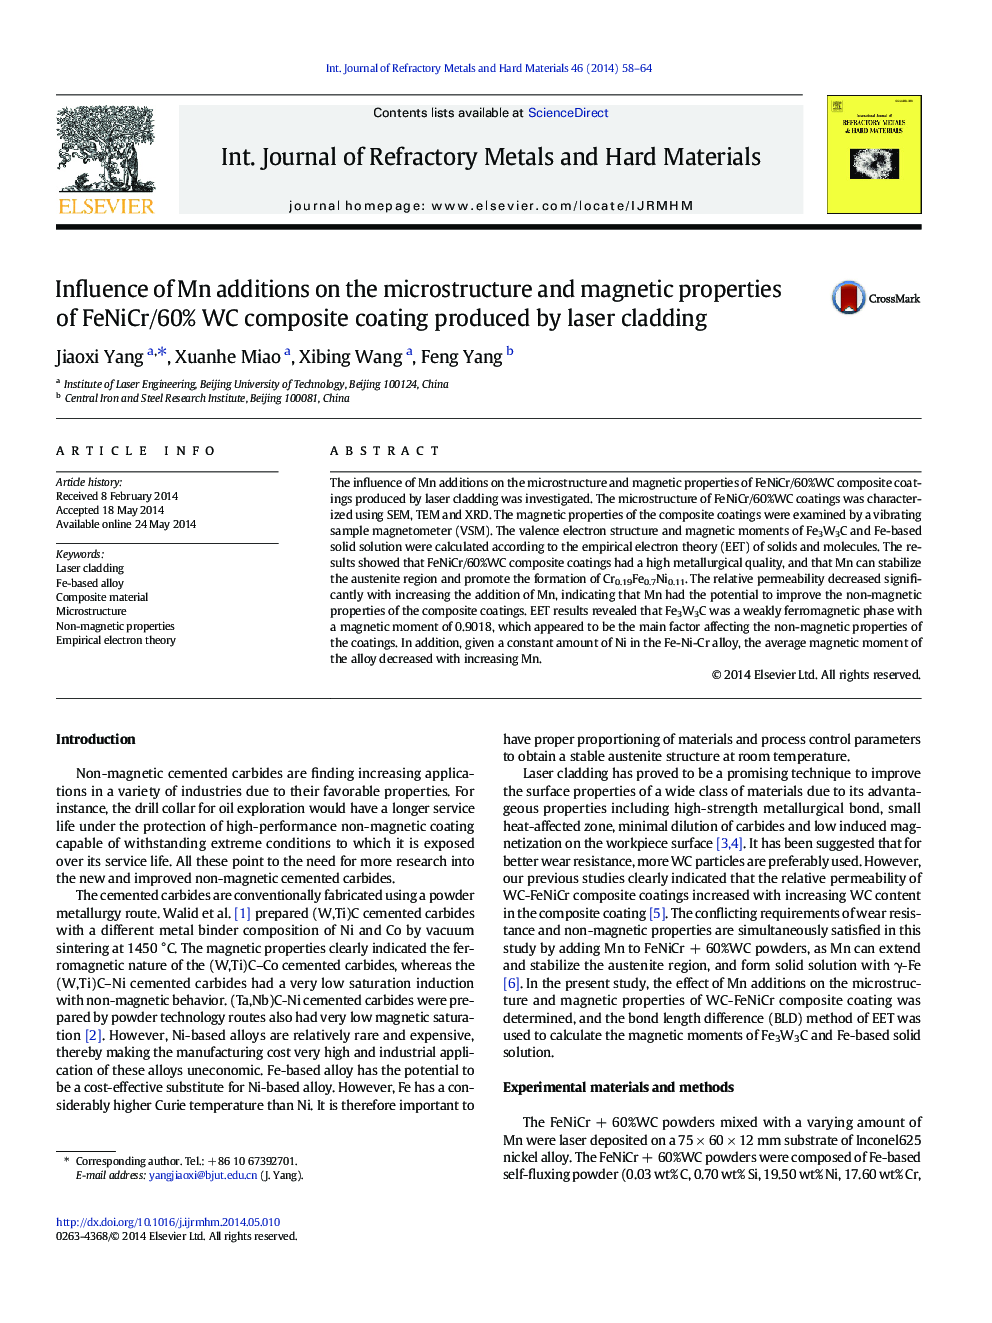 Influence of Mn additions on the microstructure and magnetic properties of FeNiCr/60% WC composite coating produced by laser cladding